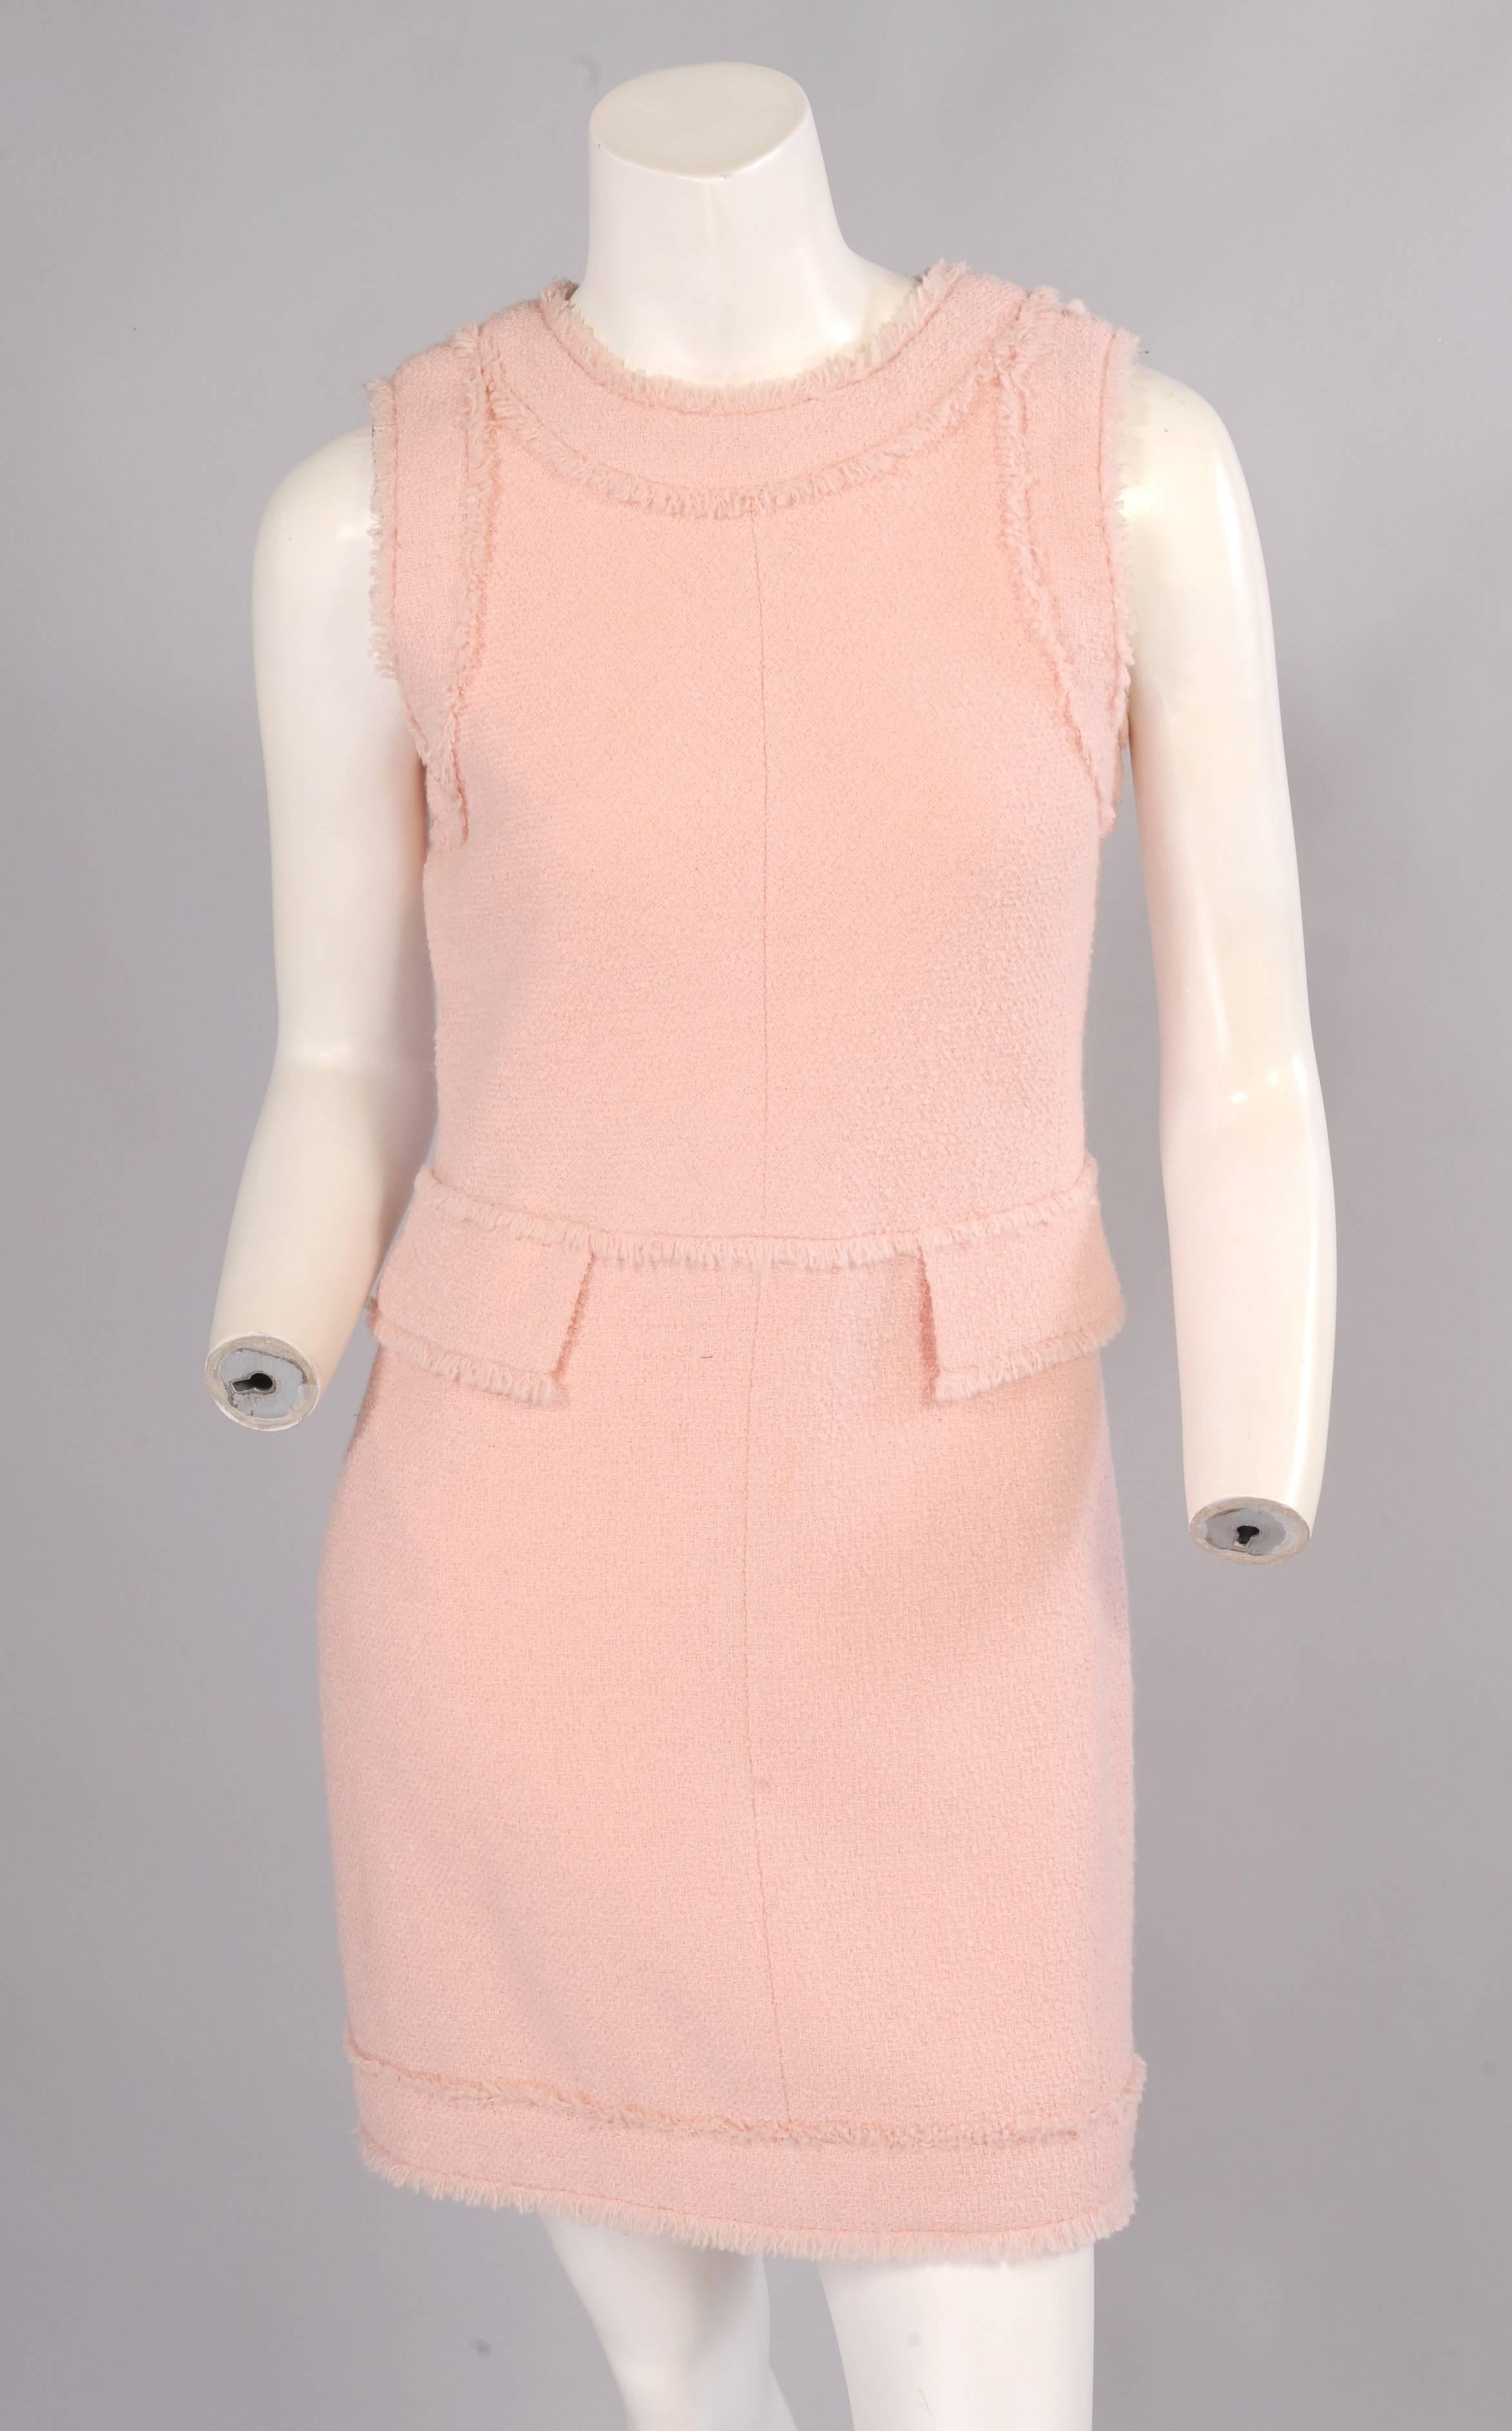 Classic pale pink wool boucle is used for the sleeveless sheath and the lining of the patent leather coat. The dress has fringe trimmed bands and pockets. It buttons down the center back with concealed buttons and snaps. It is fully lined in pale